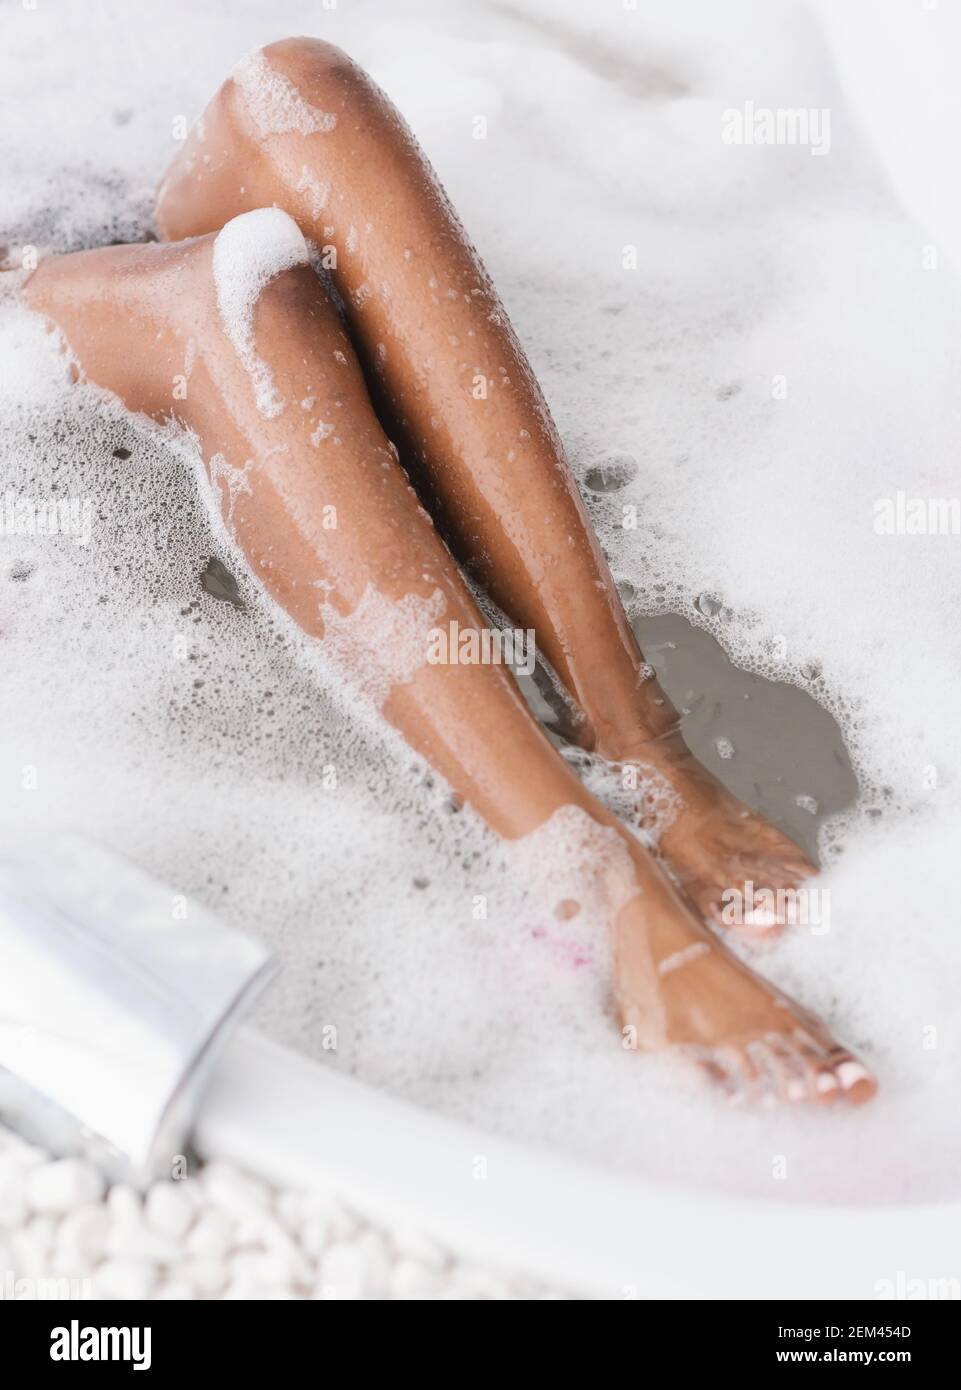 Depilation, epilation and hair removal at home Stock Photo